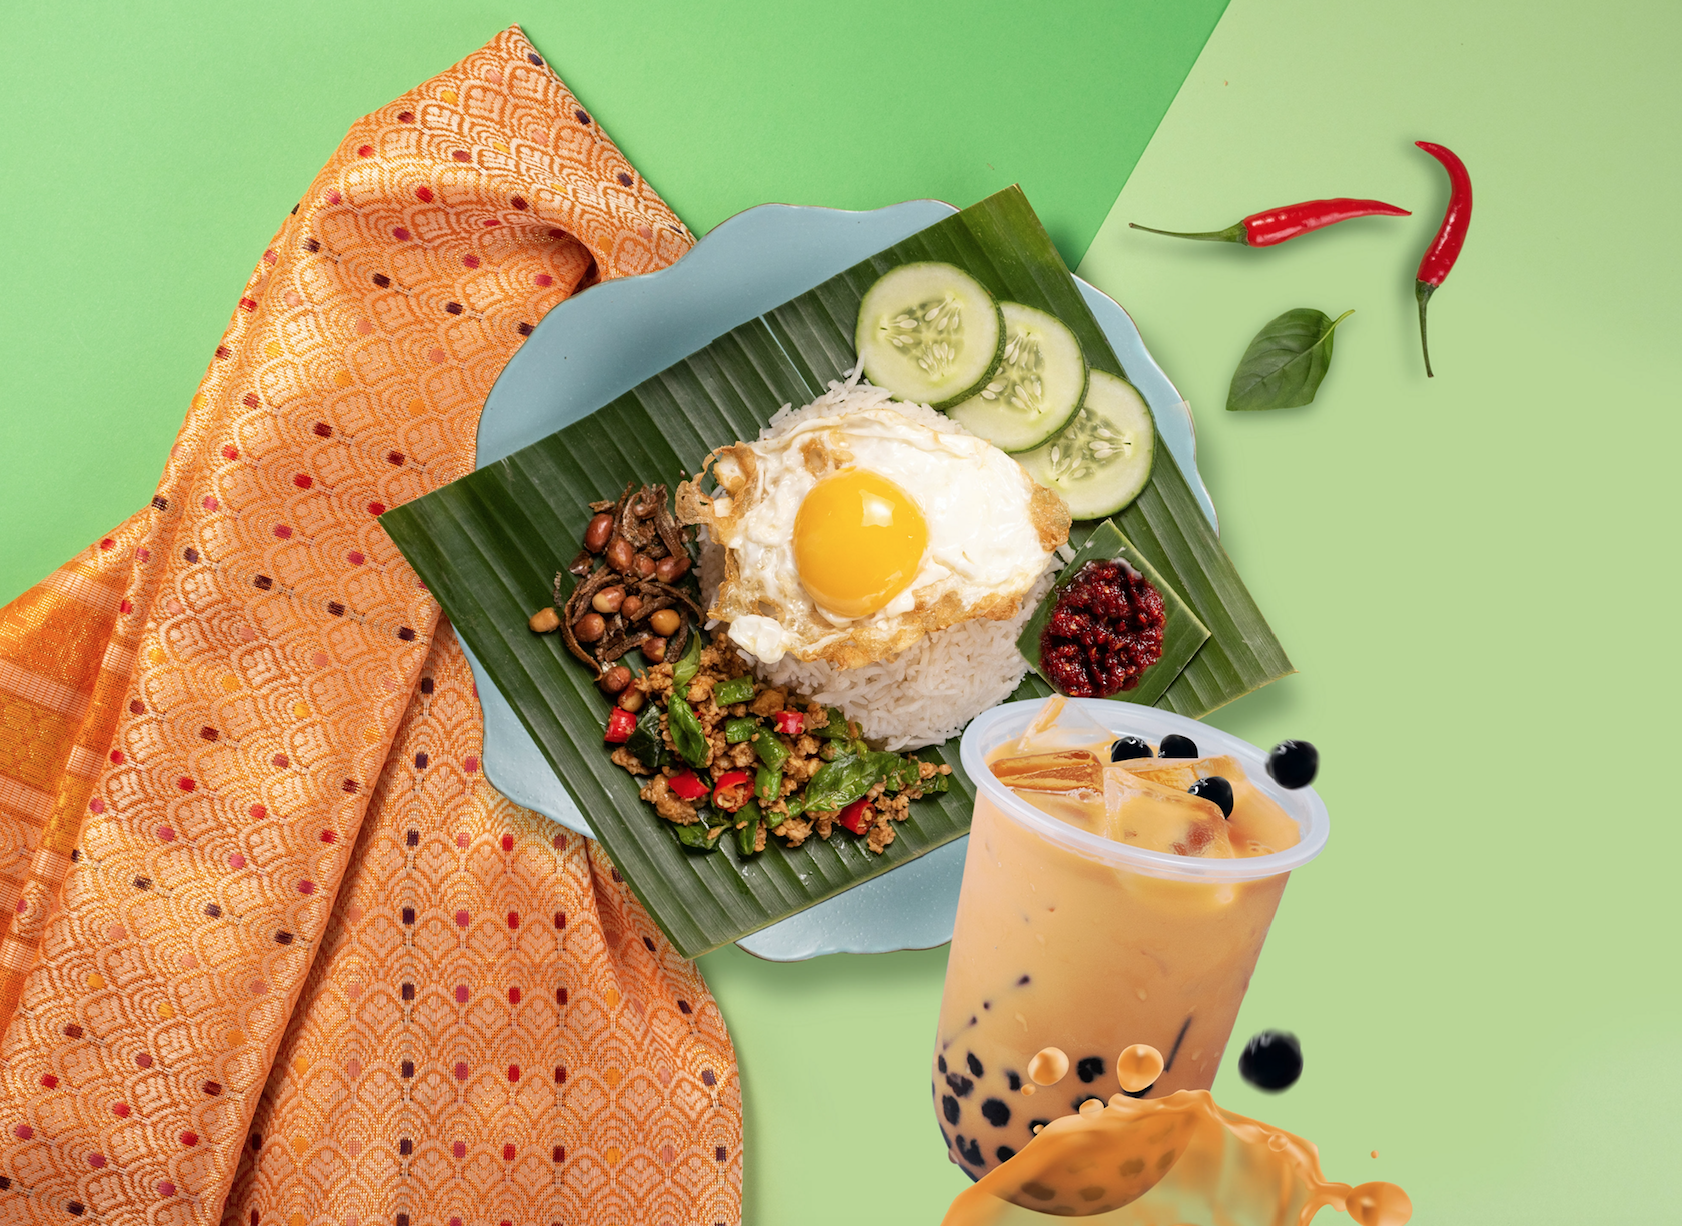 S'pore restaurant crave launches thai-style nasi lemak, comes with green curry and more